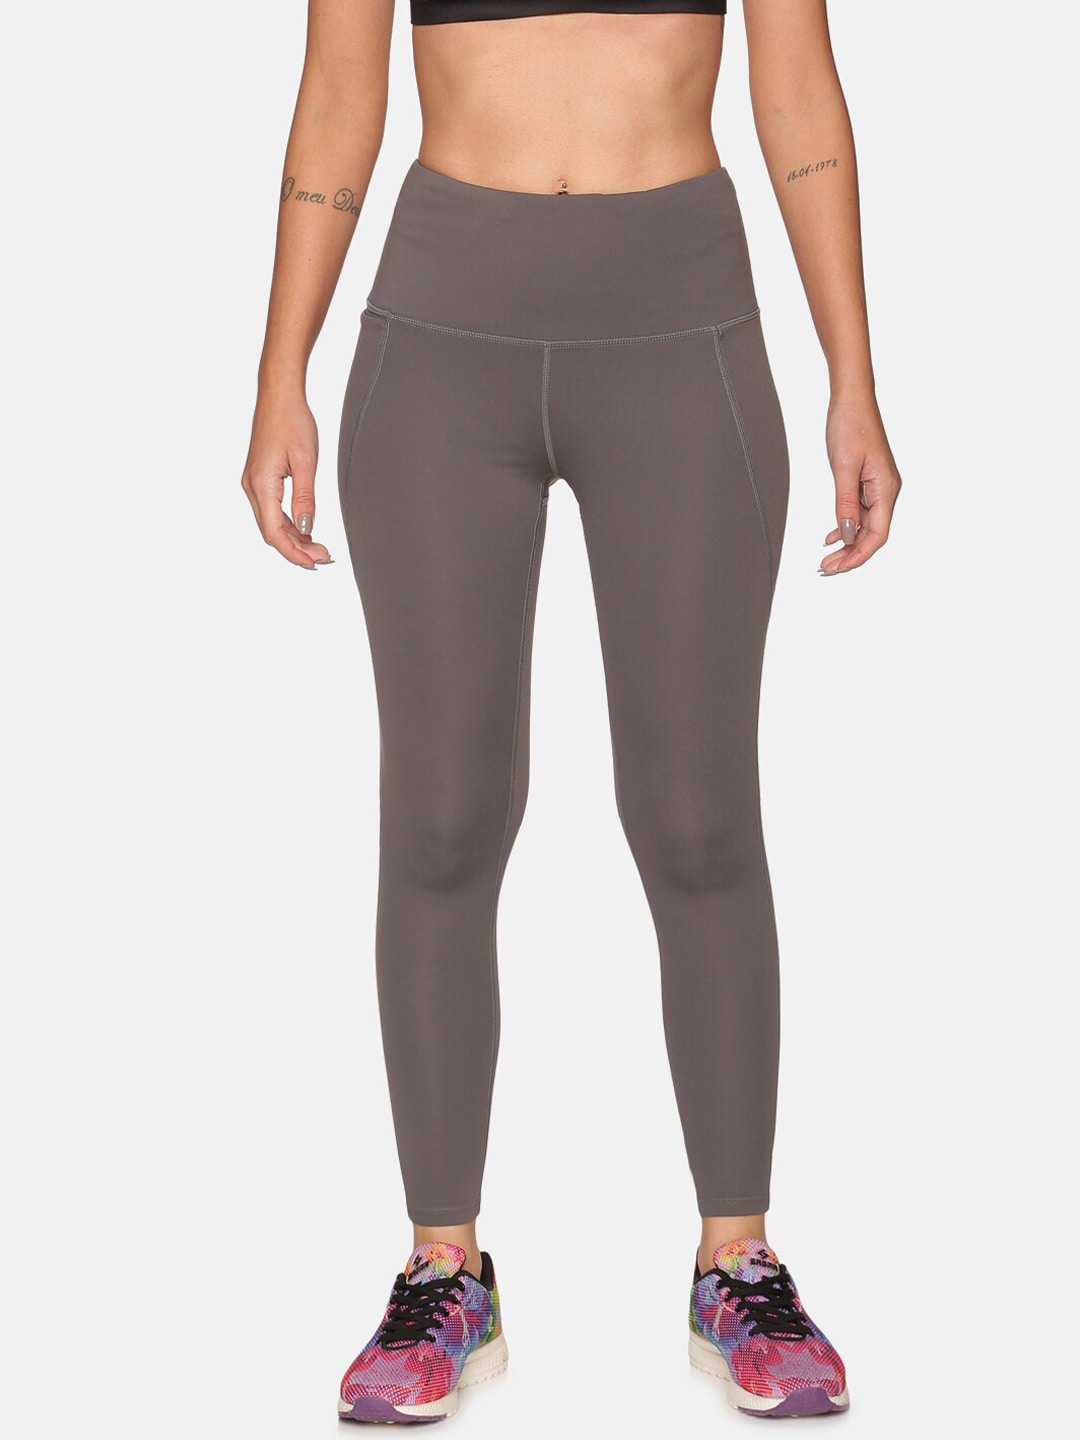 BlissClub Women Grey Super Stretchy and High Waisted The Ultimate Leggings Price in India